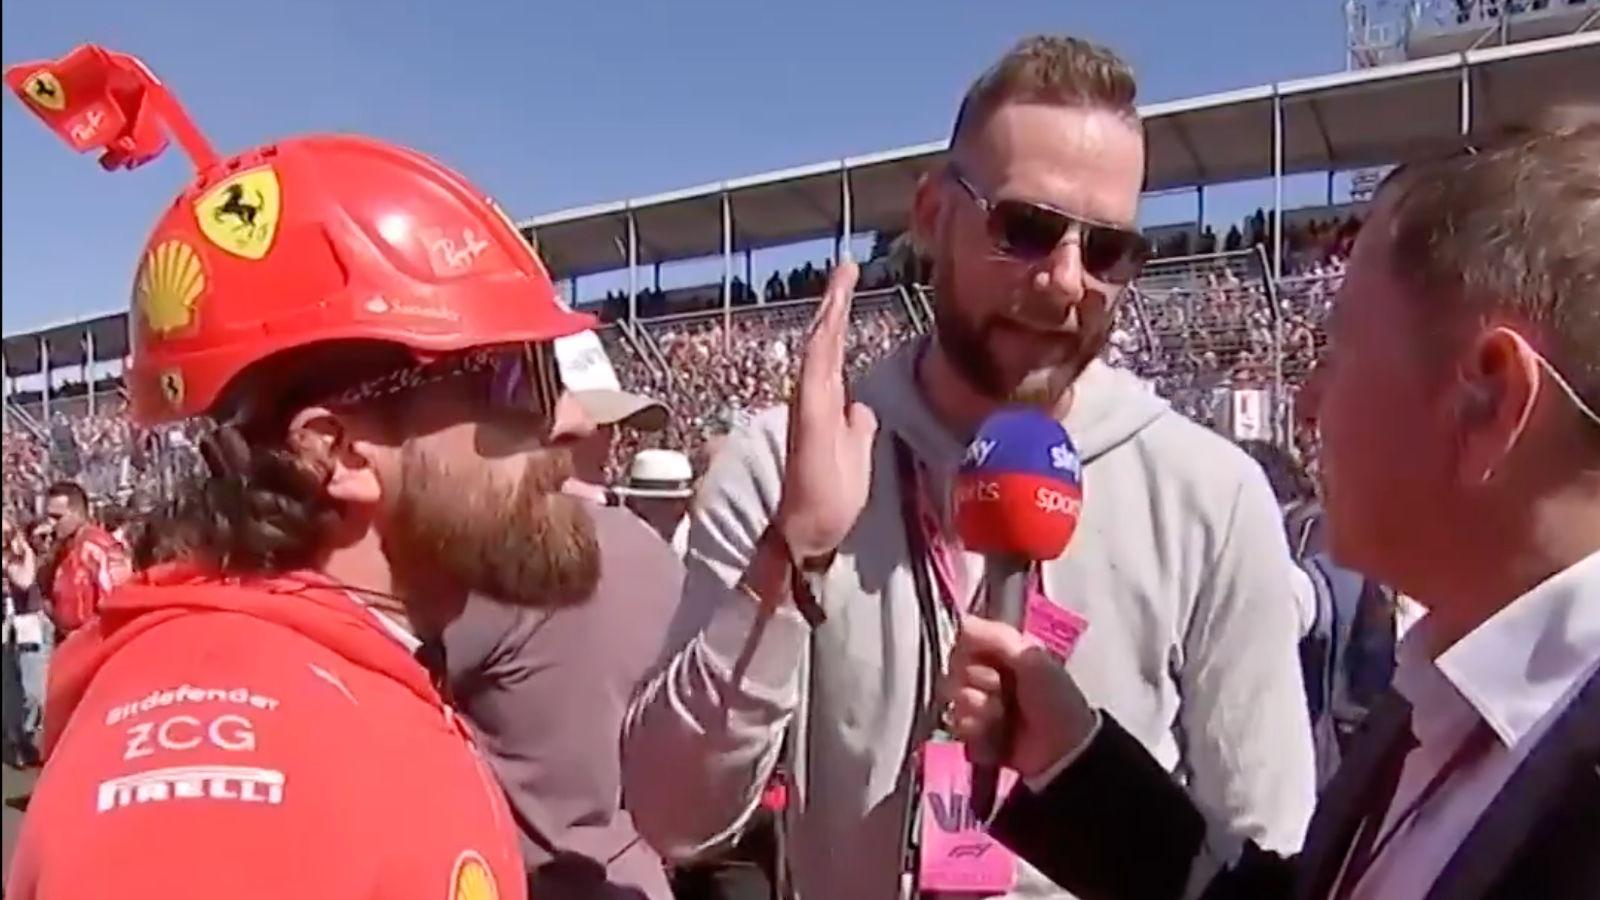 Martin Brundle interviews YouTubers Dude Perfect